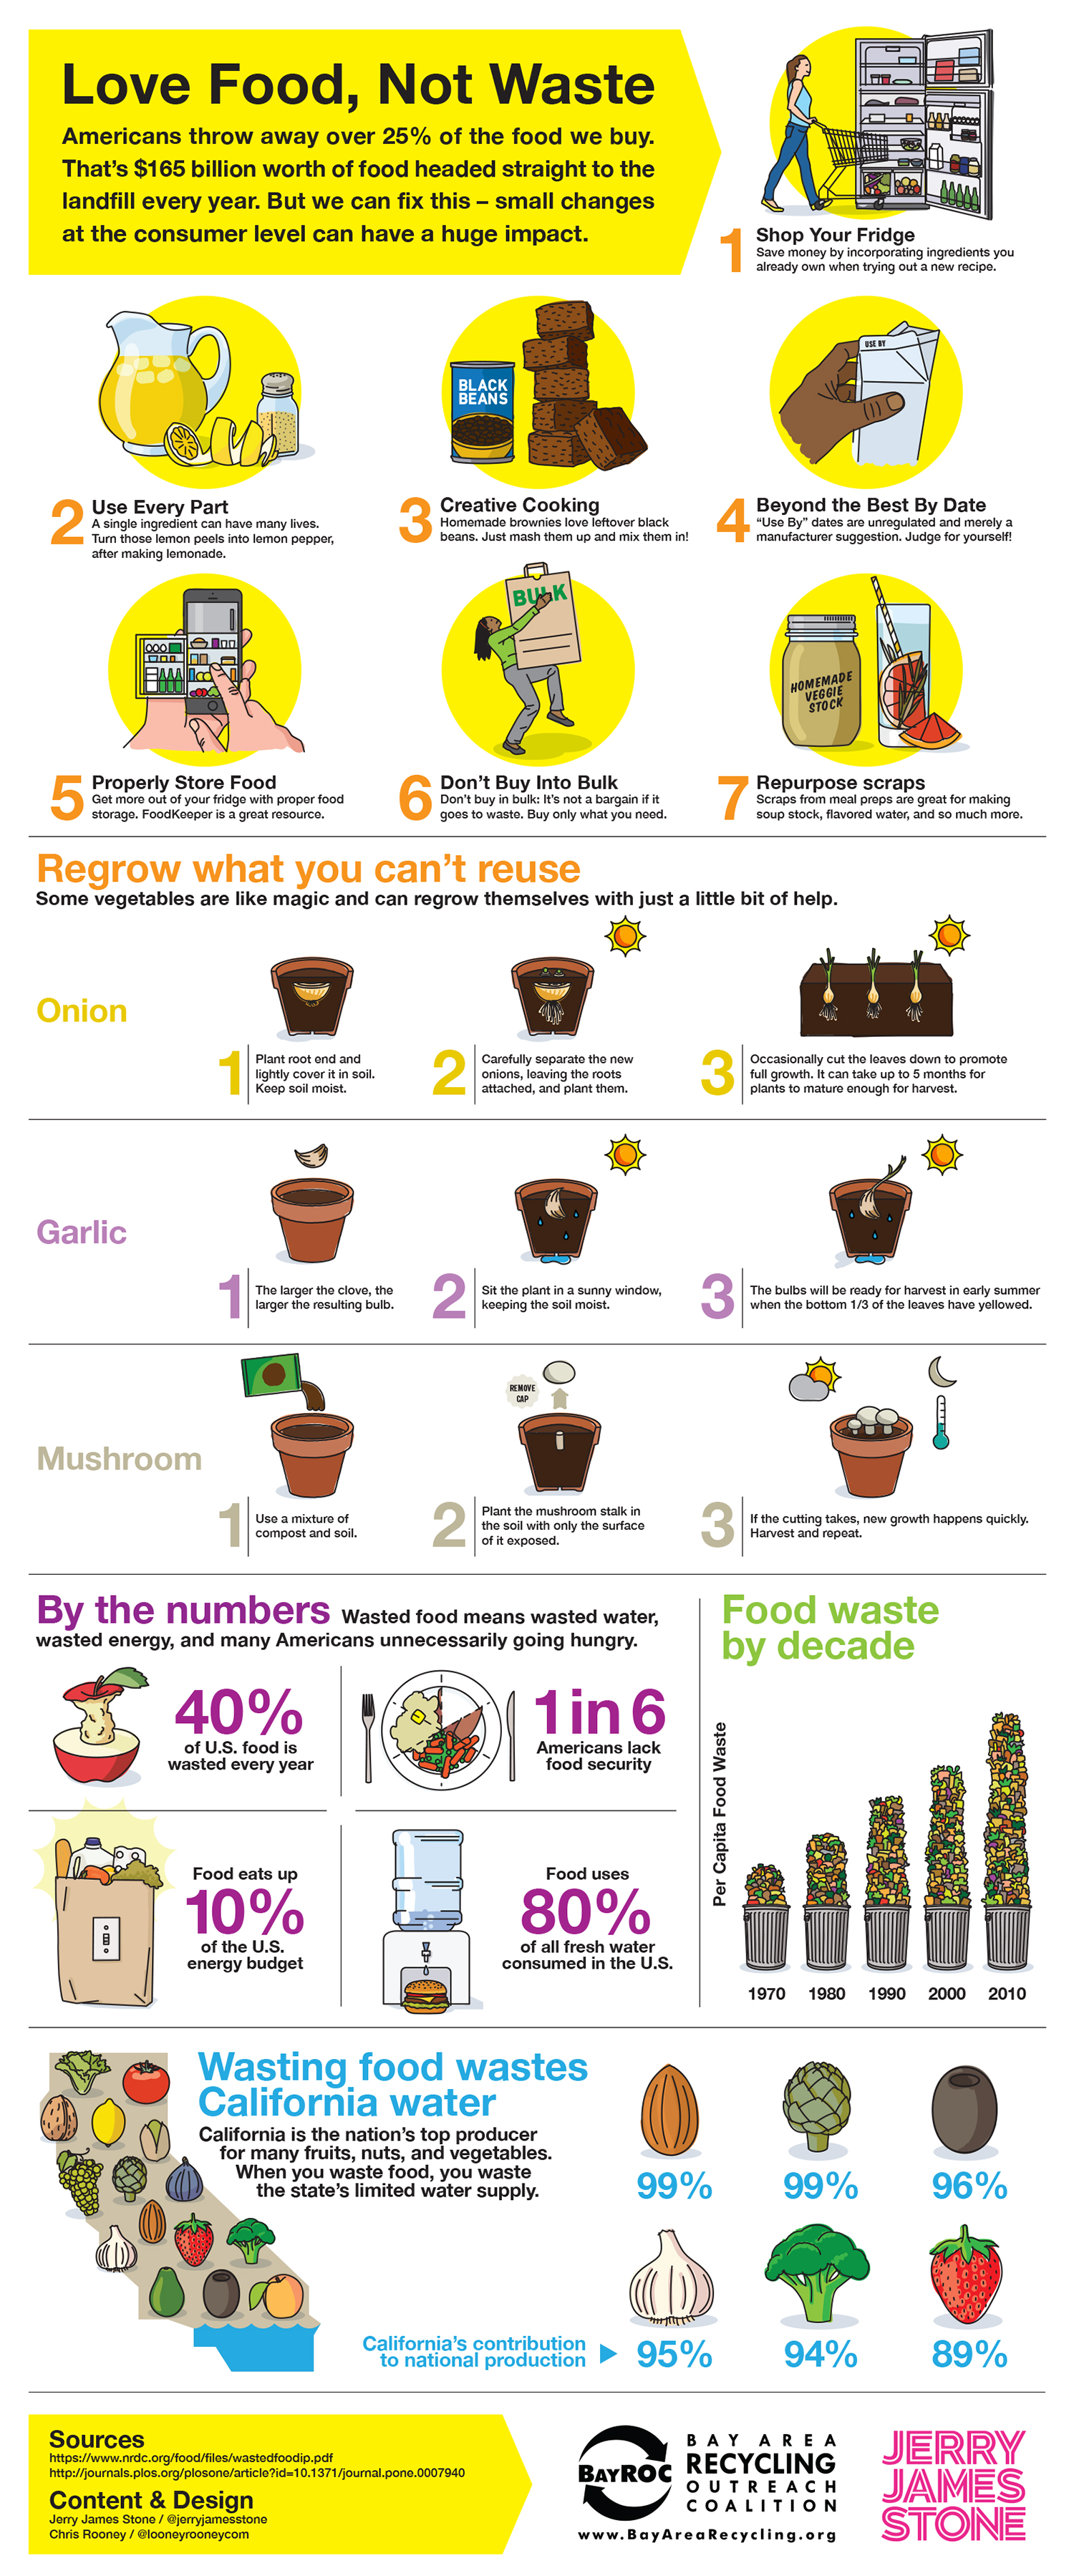 7 Everyday Tips for Fighting Food Waste